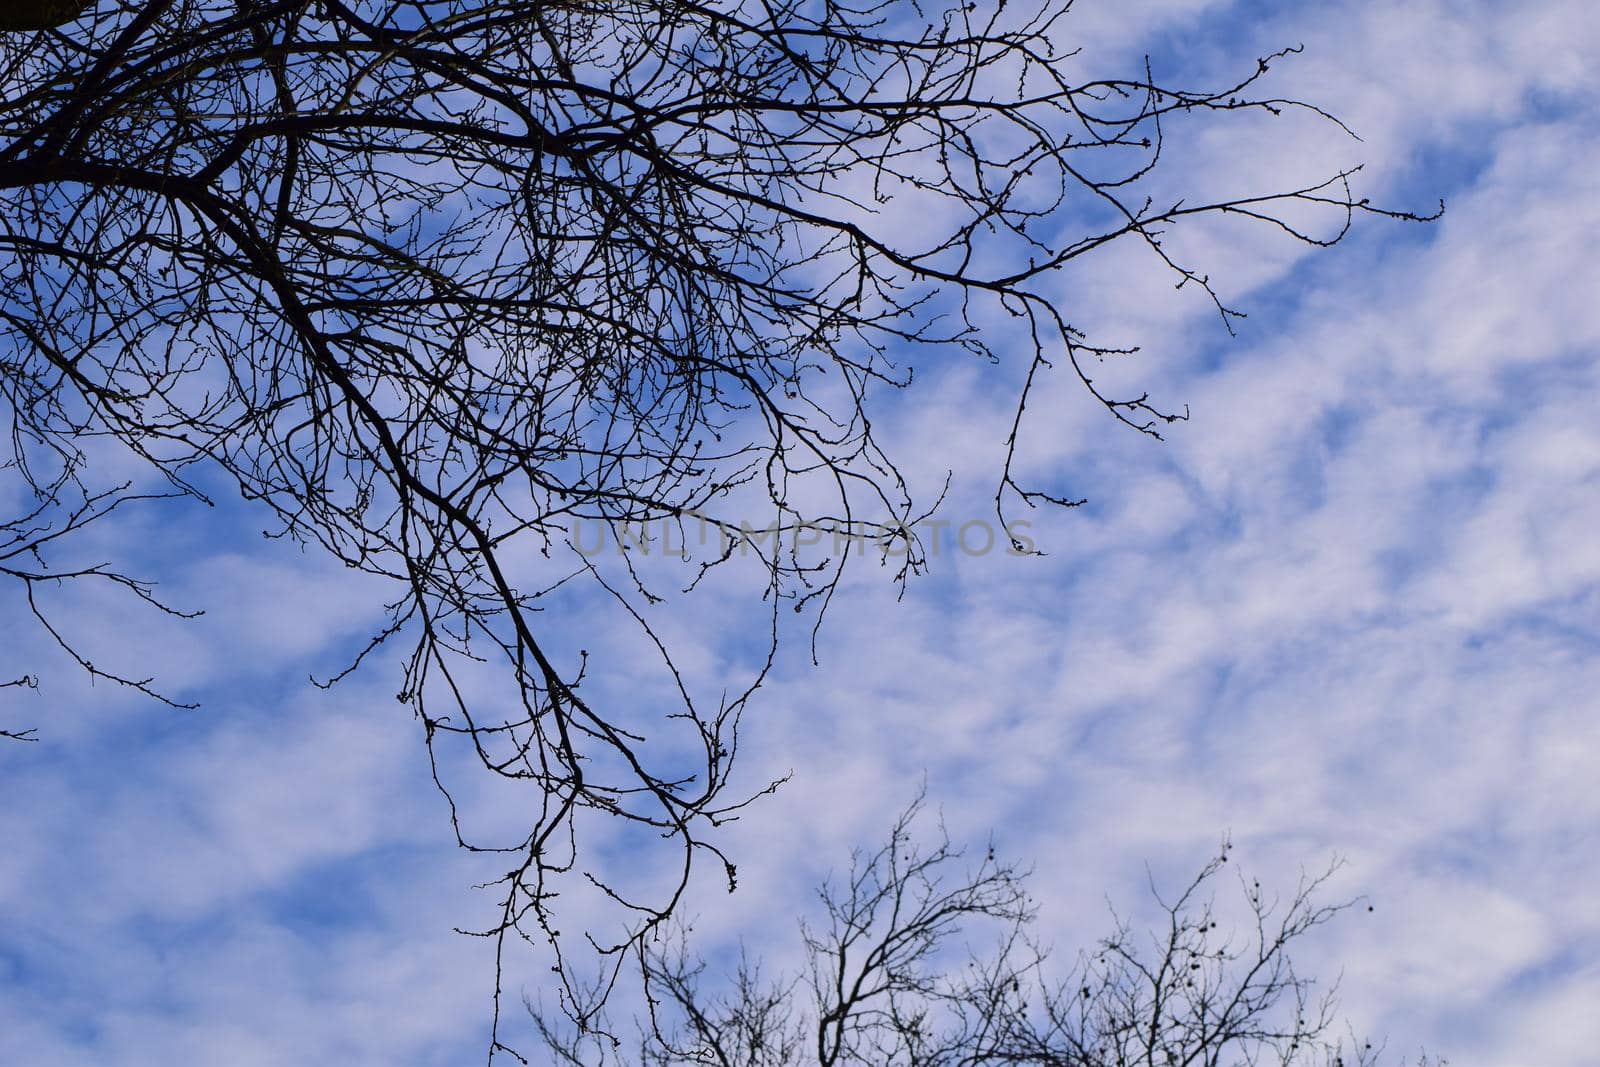 Bare plane tree branches from below against a blue sky with white clouds